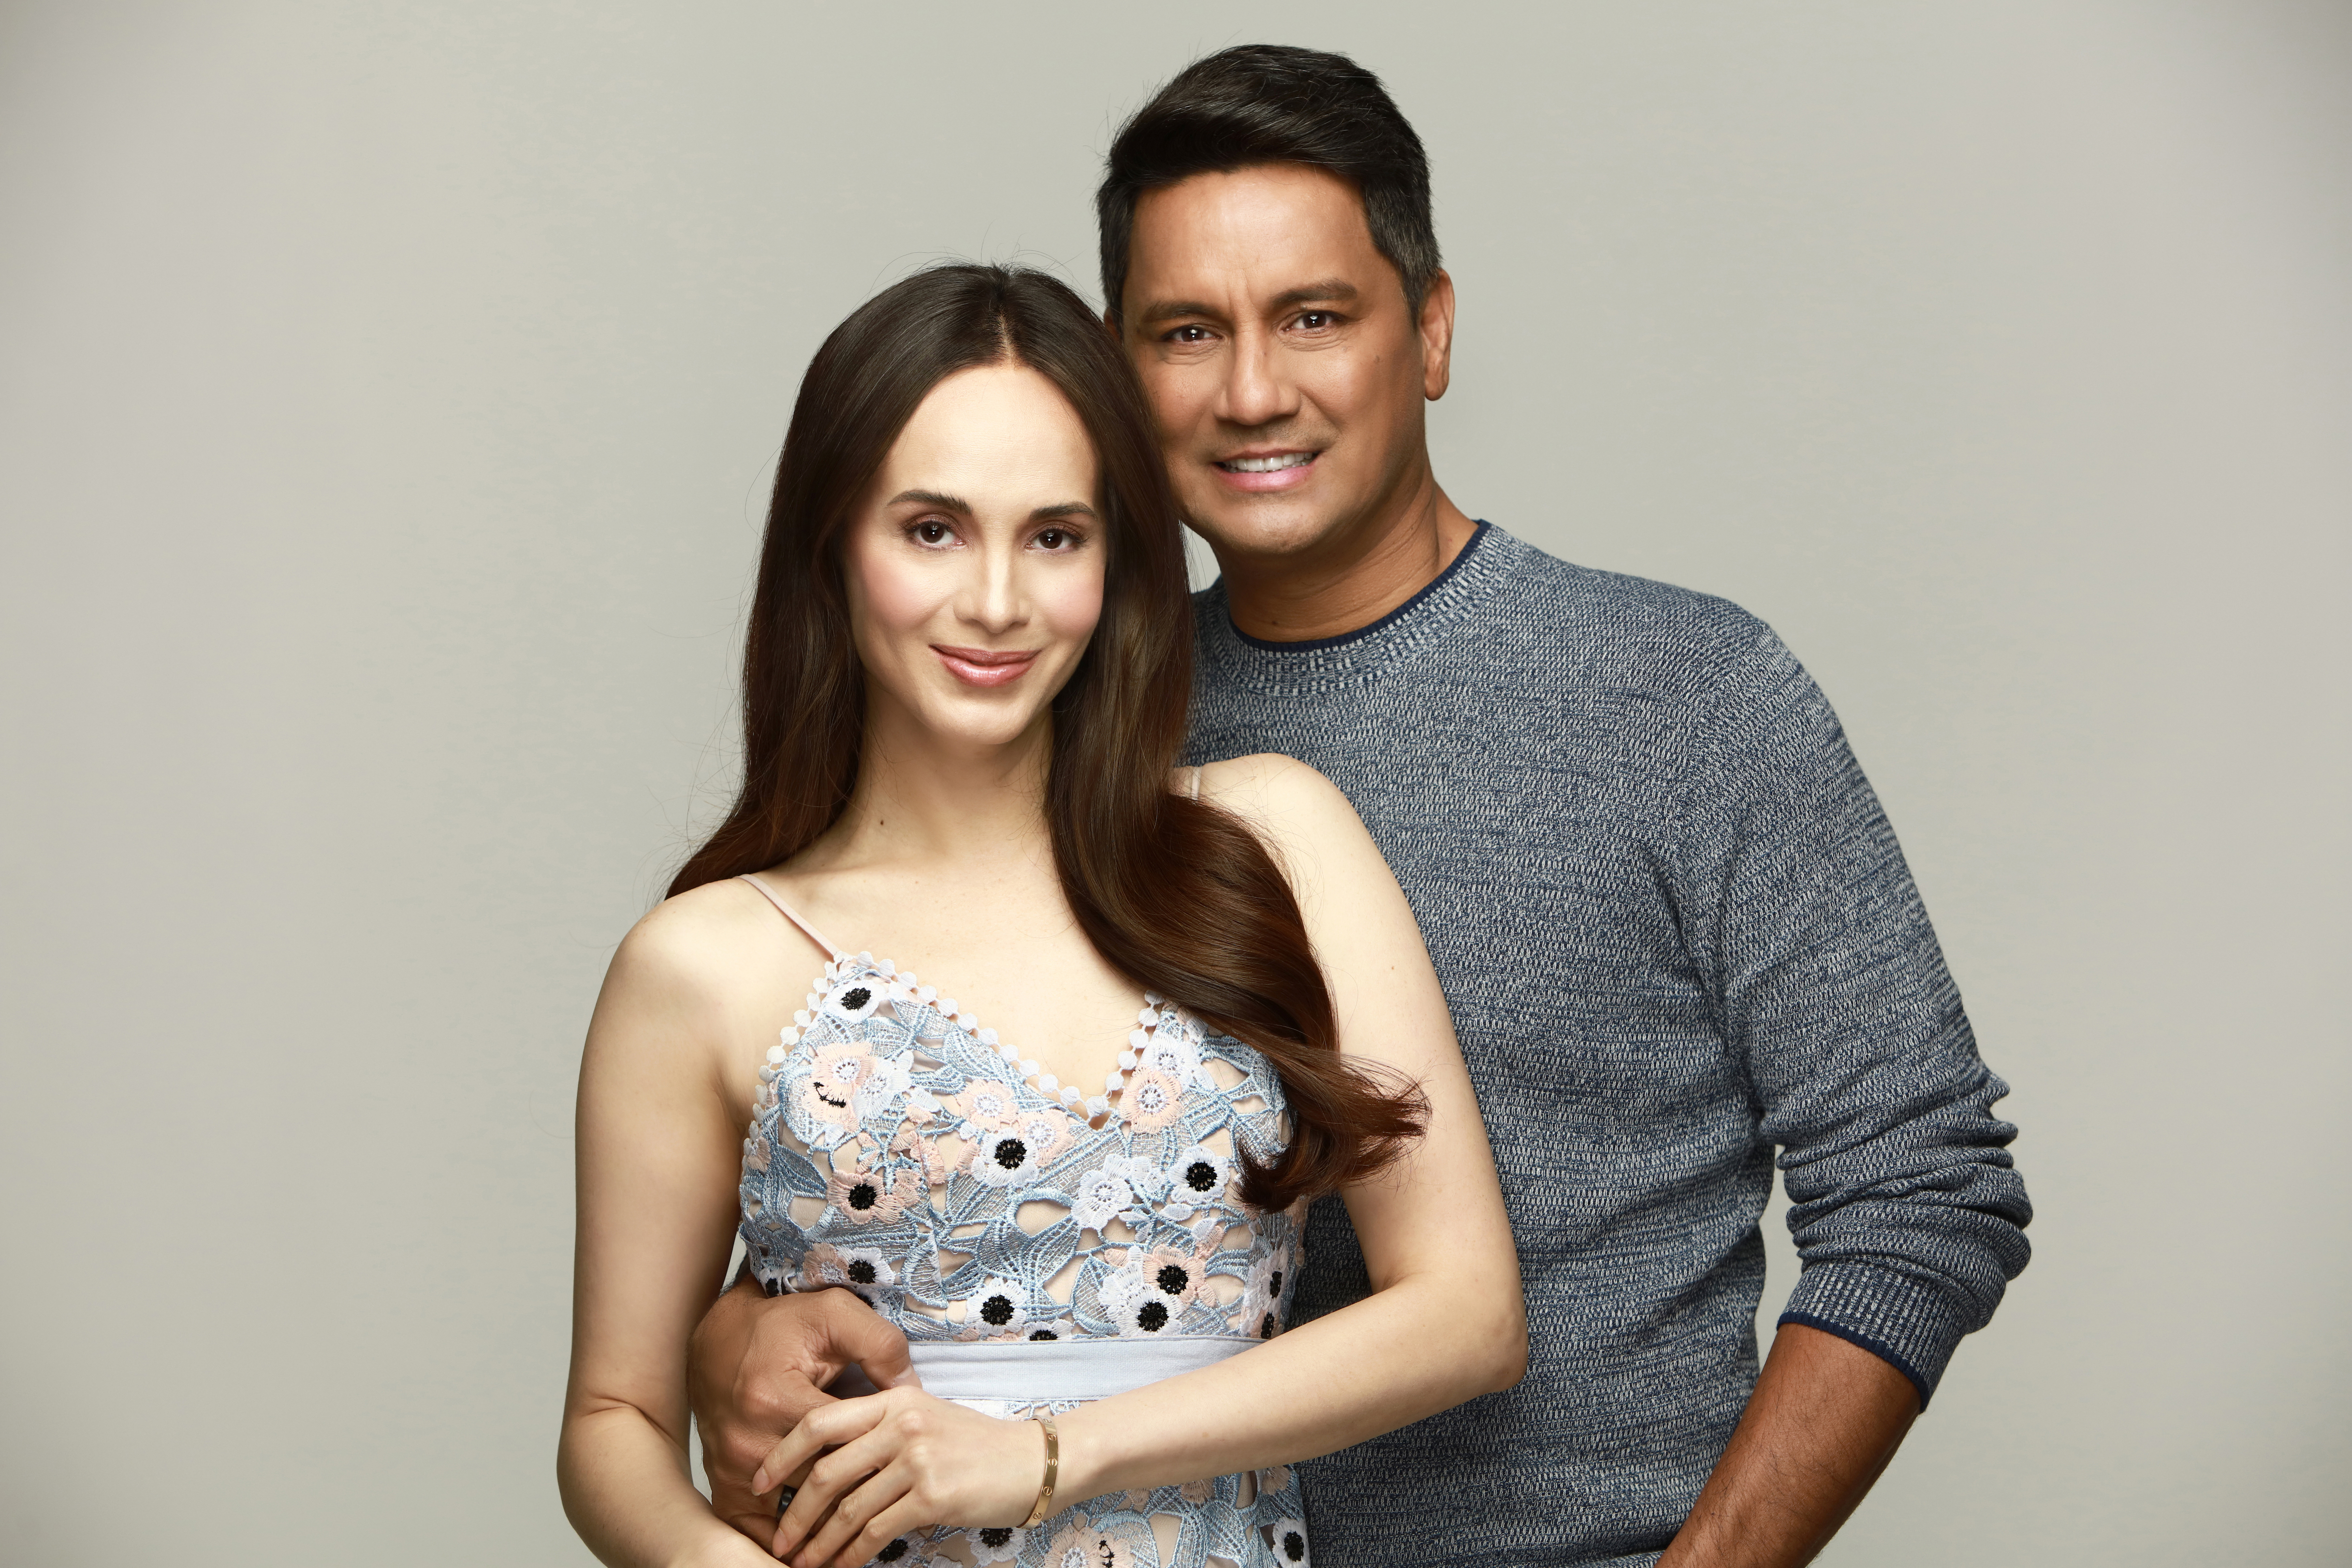 Richard and Lucy, Ultherapy’s newest endorsers, remain everyone’s “couple goals”